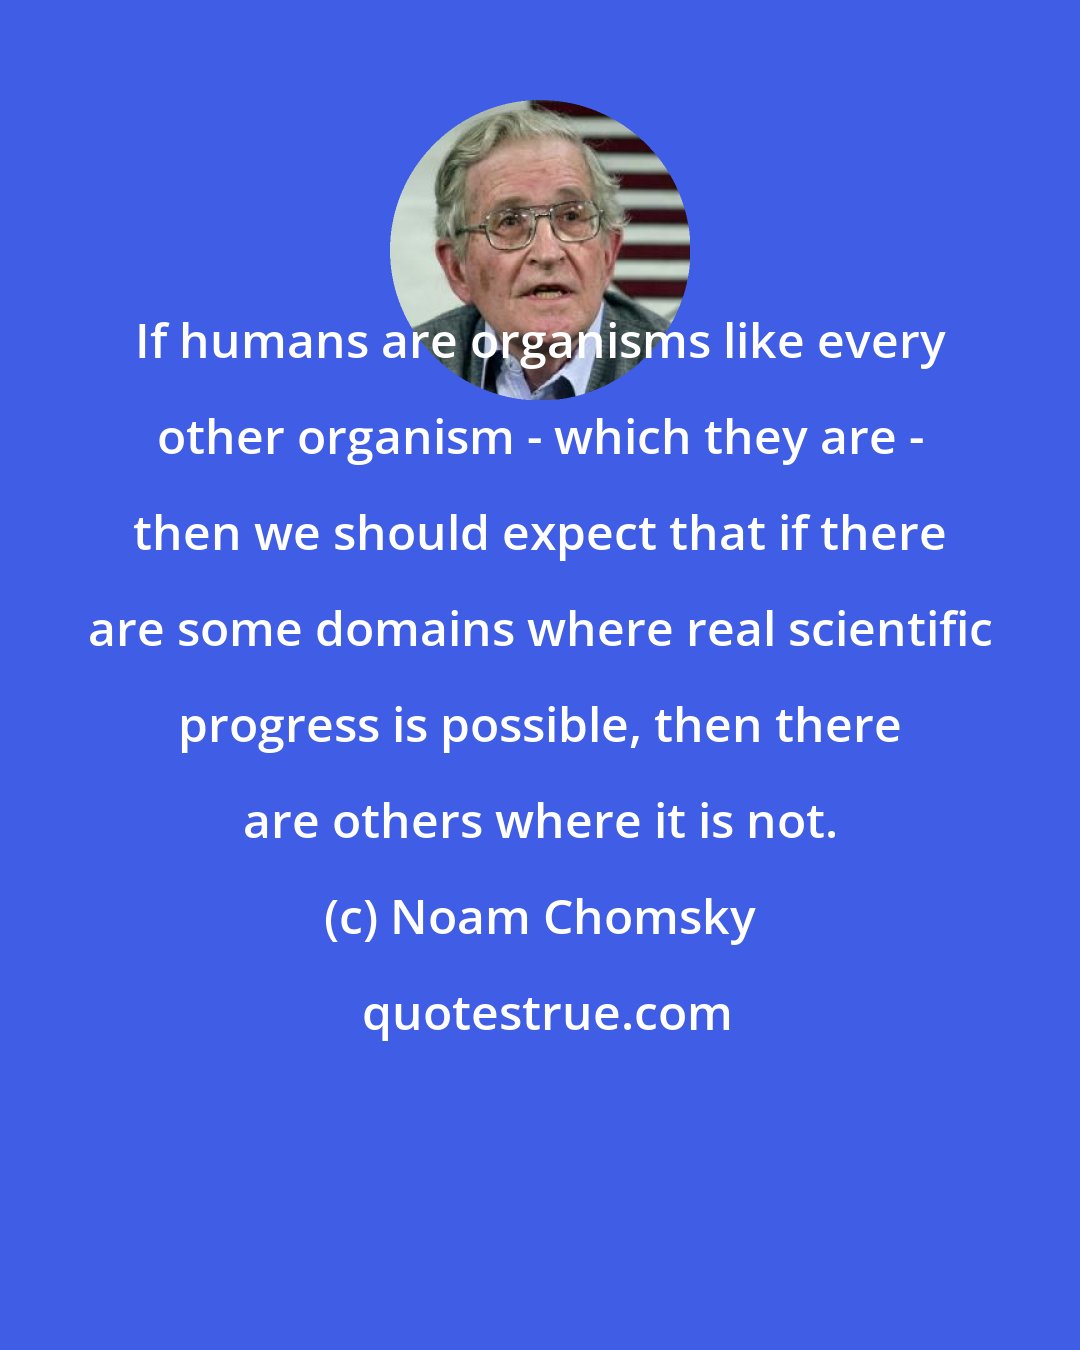 Noam Chomsky: If humans are organisms like every other organism - which they are - then we should expect that if there are some domains where real scientific progress is possible, then there are others where it is not.